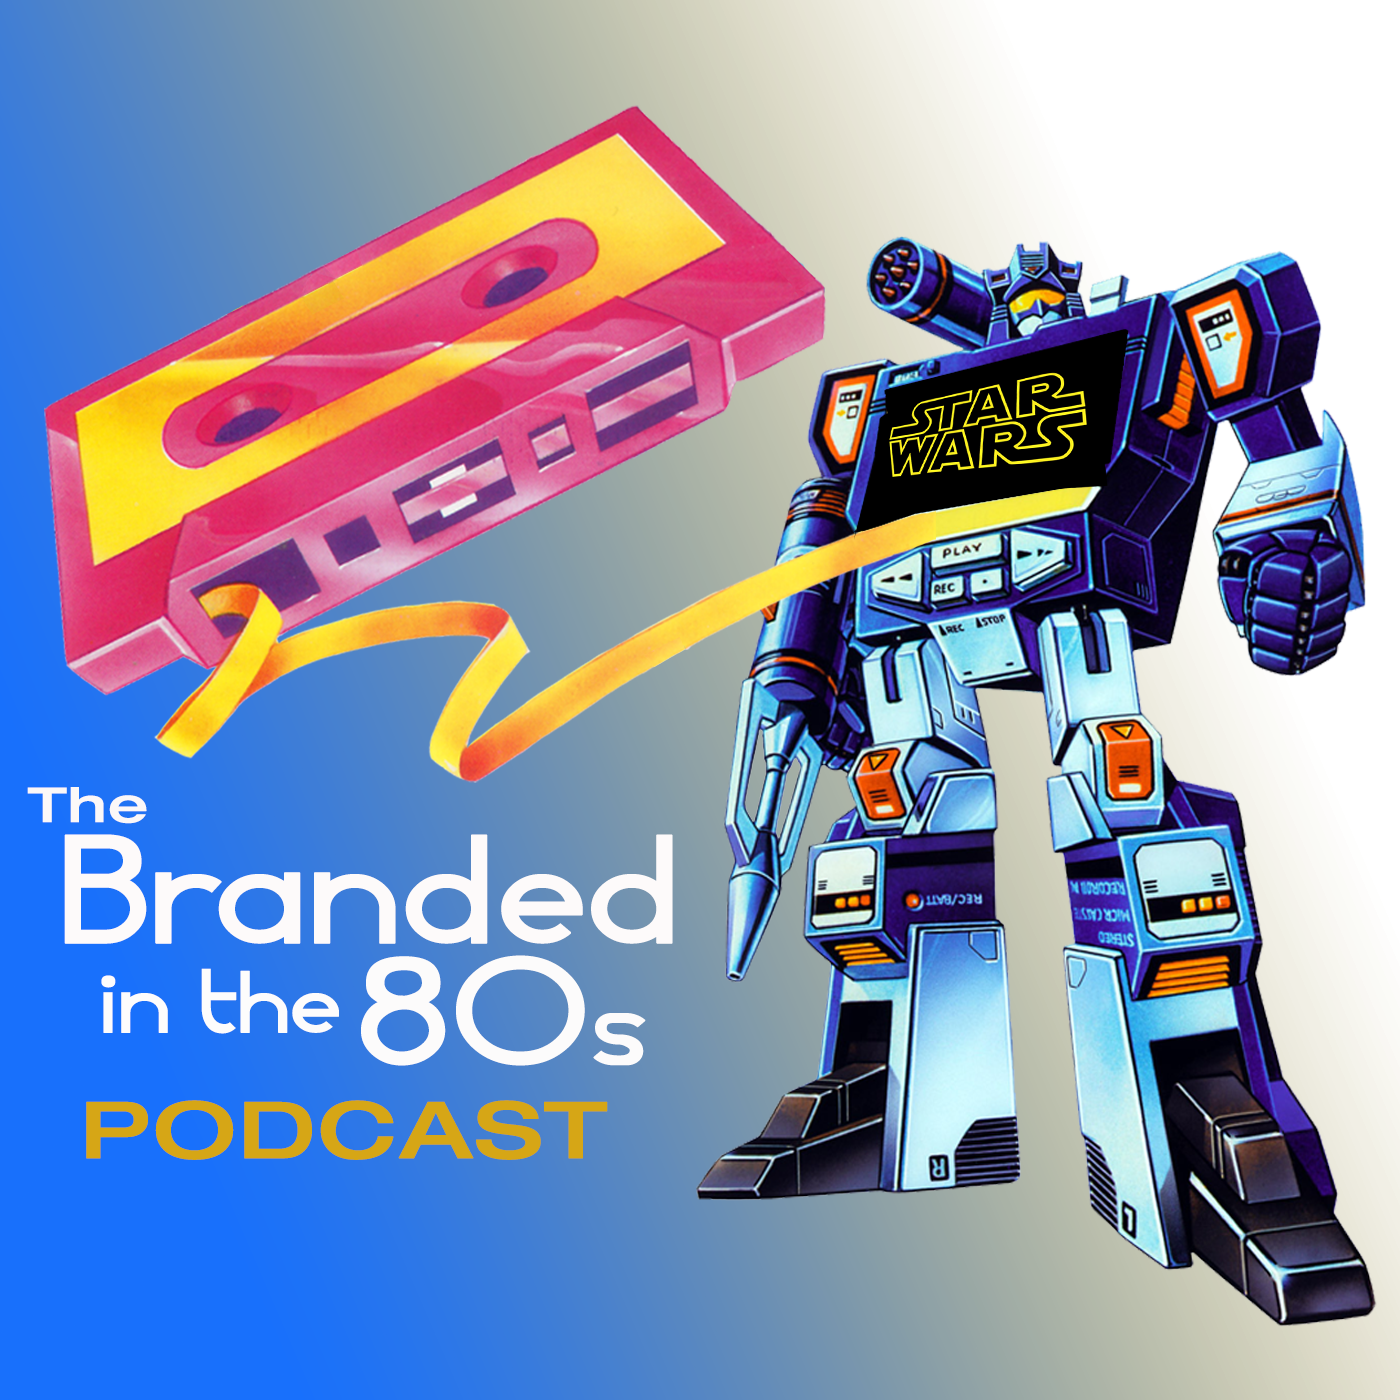 The All New Branded Podcast – Passing down the Matrix of Nostalgia